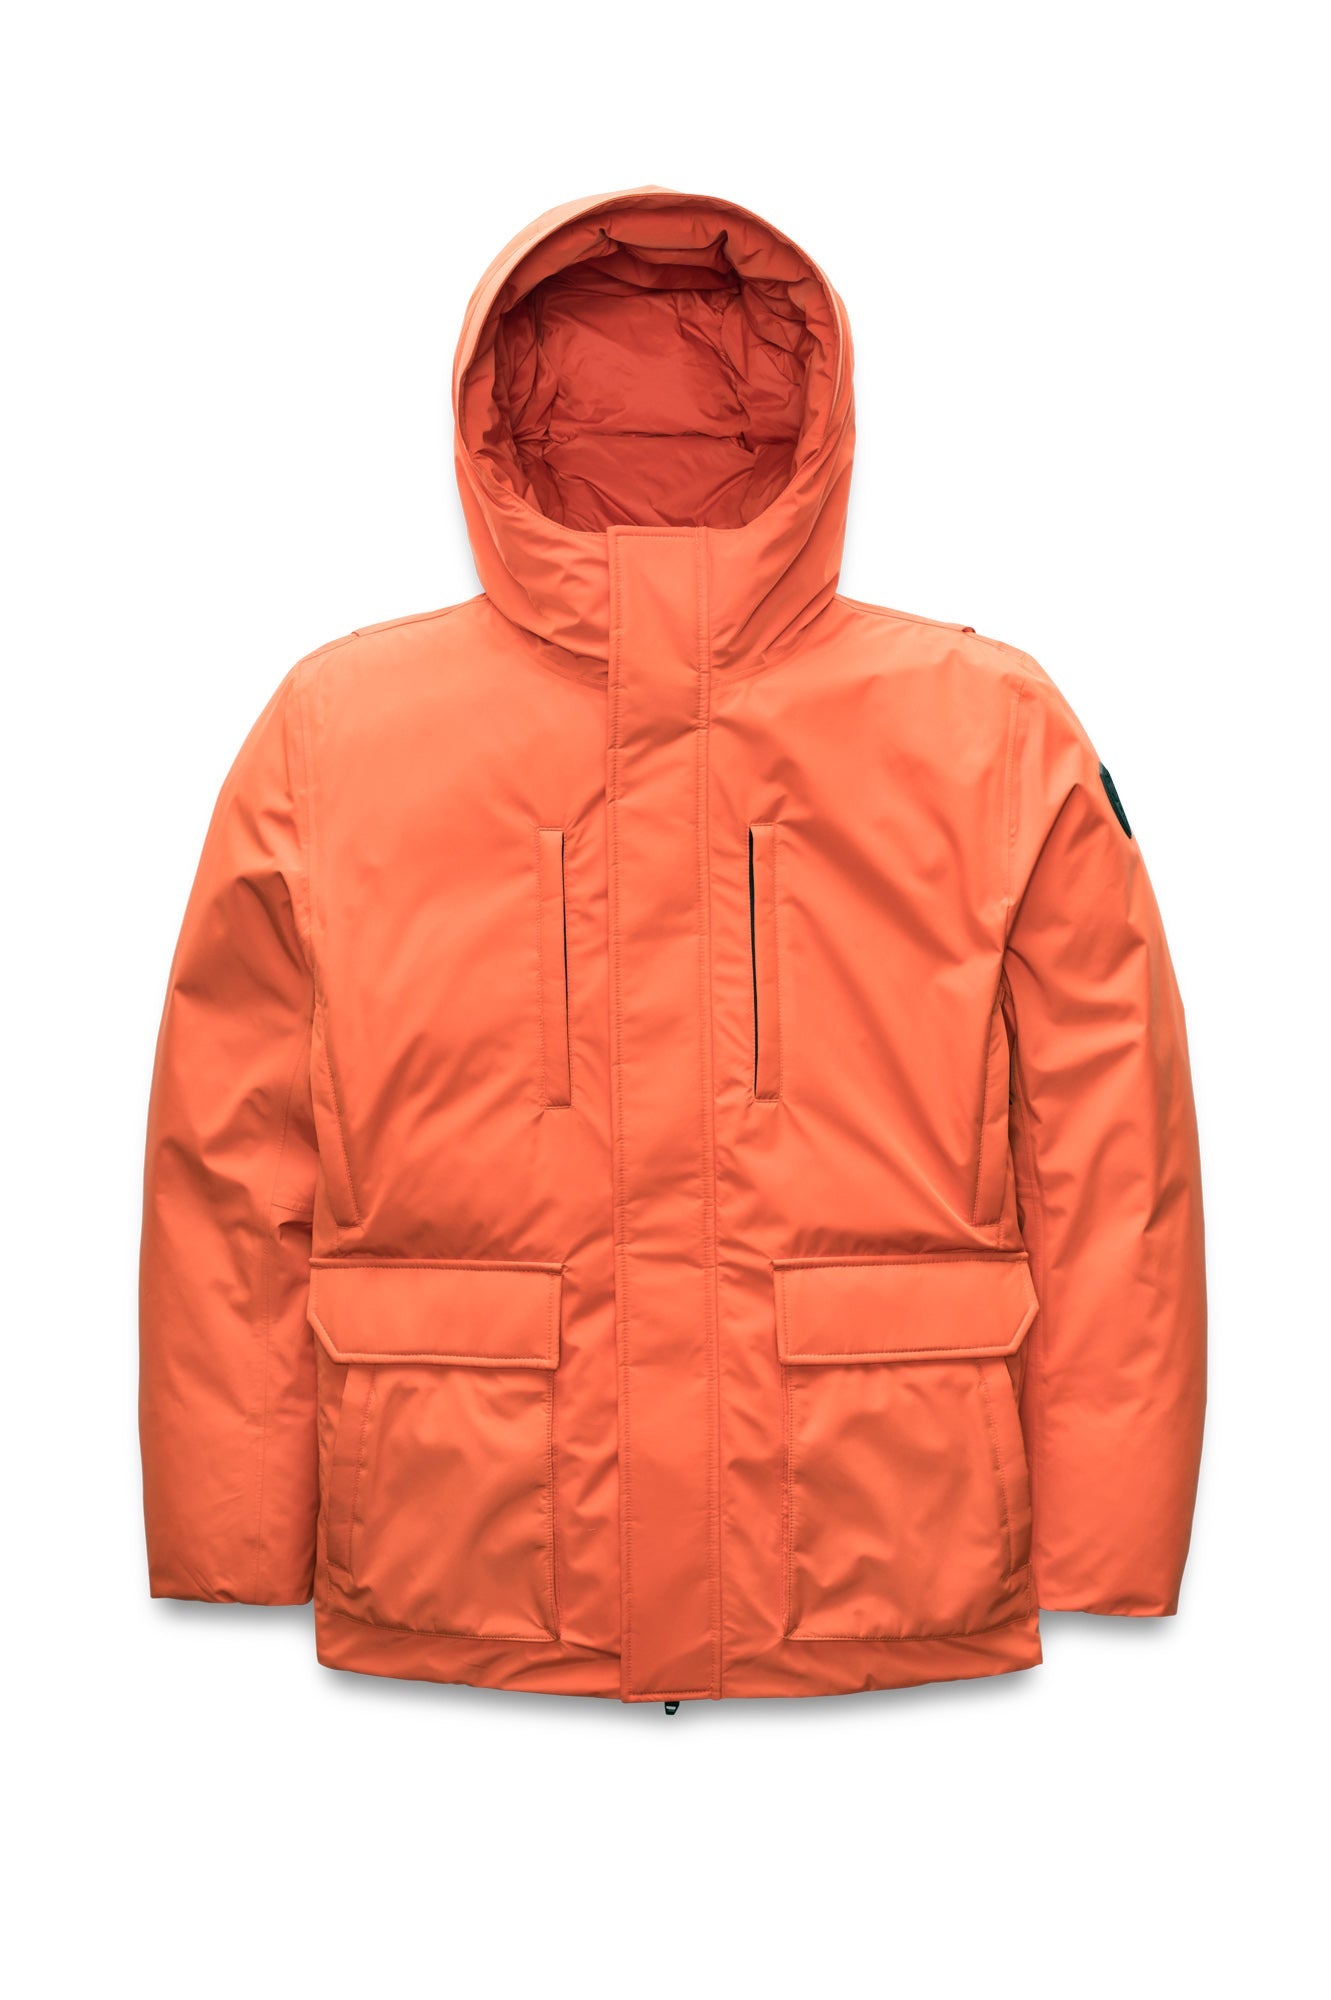 Geo Men's Short Parka in hip length, Canadian duck down insulation, non-removable hood, and two-way zipper, in Terracotta